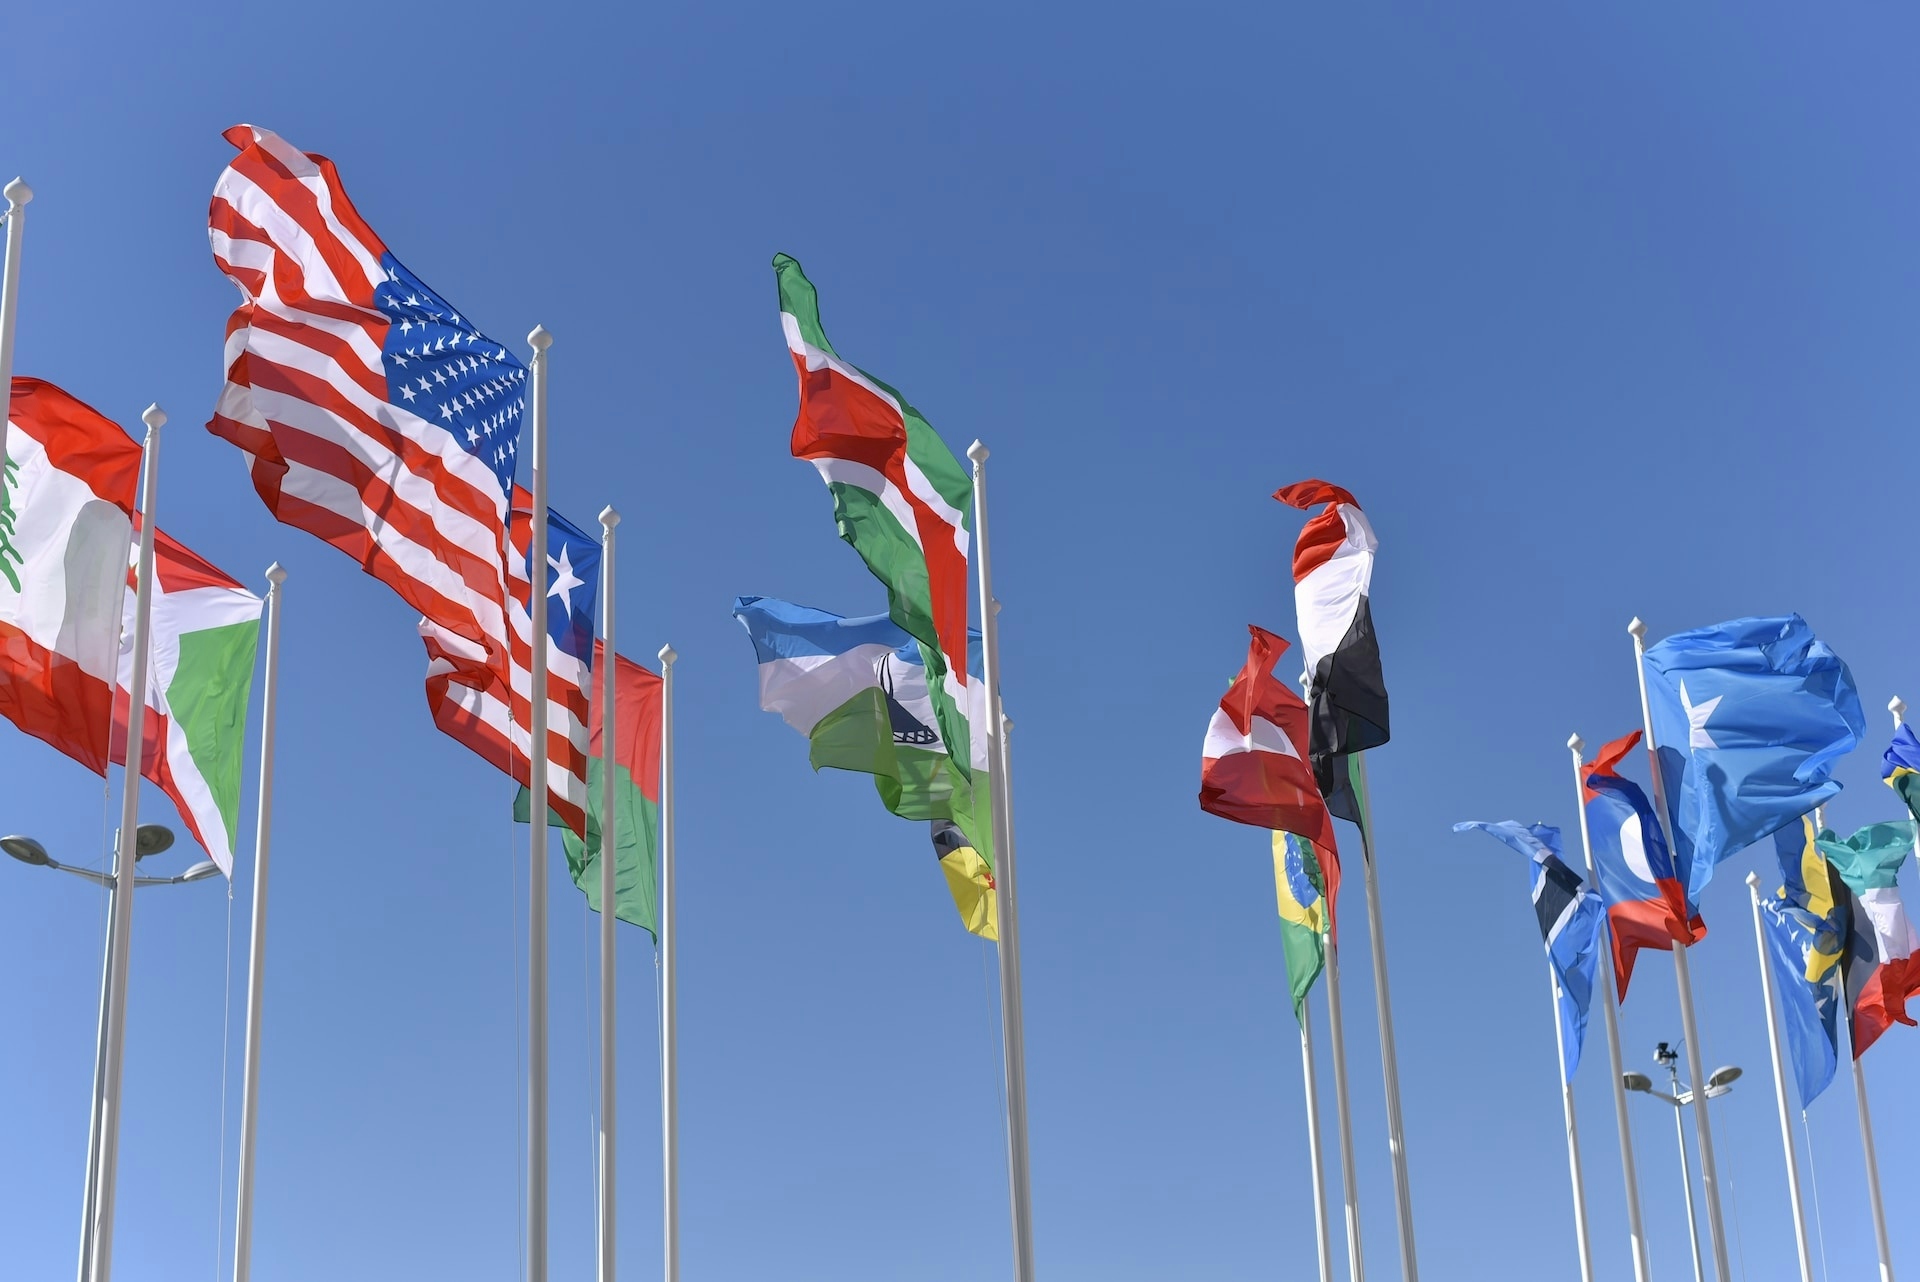 Country flags blowing in the wind in front of a blue sky